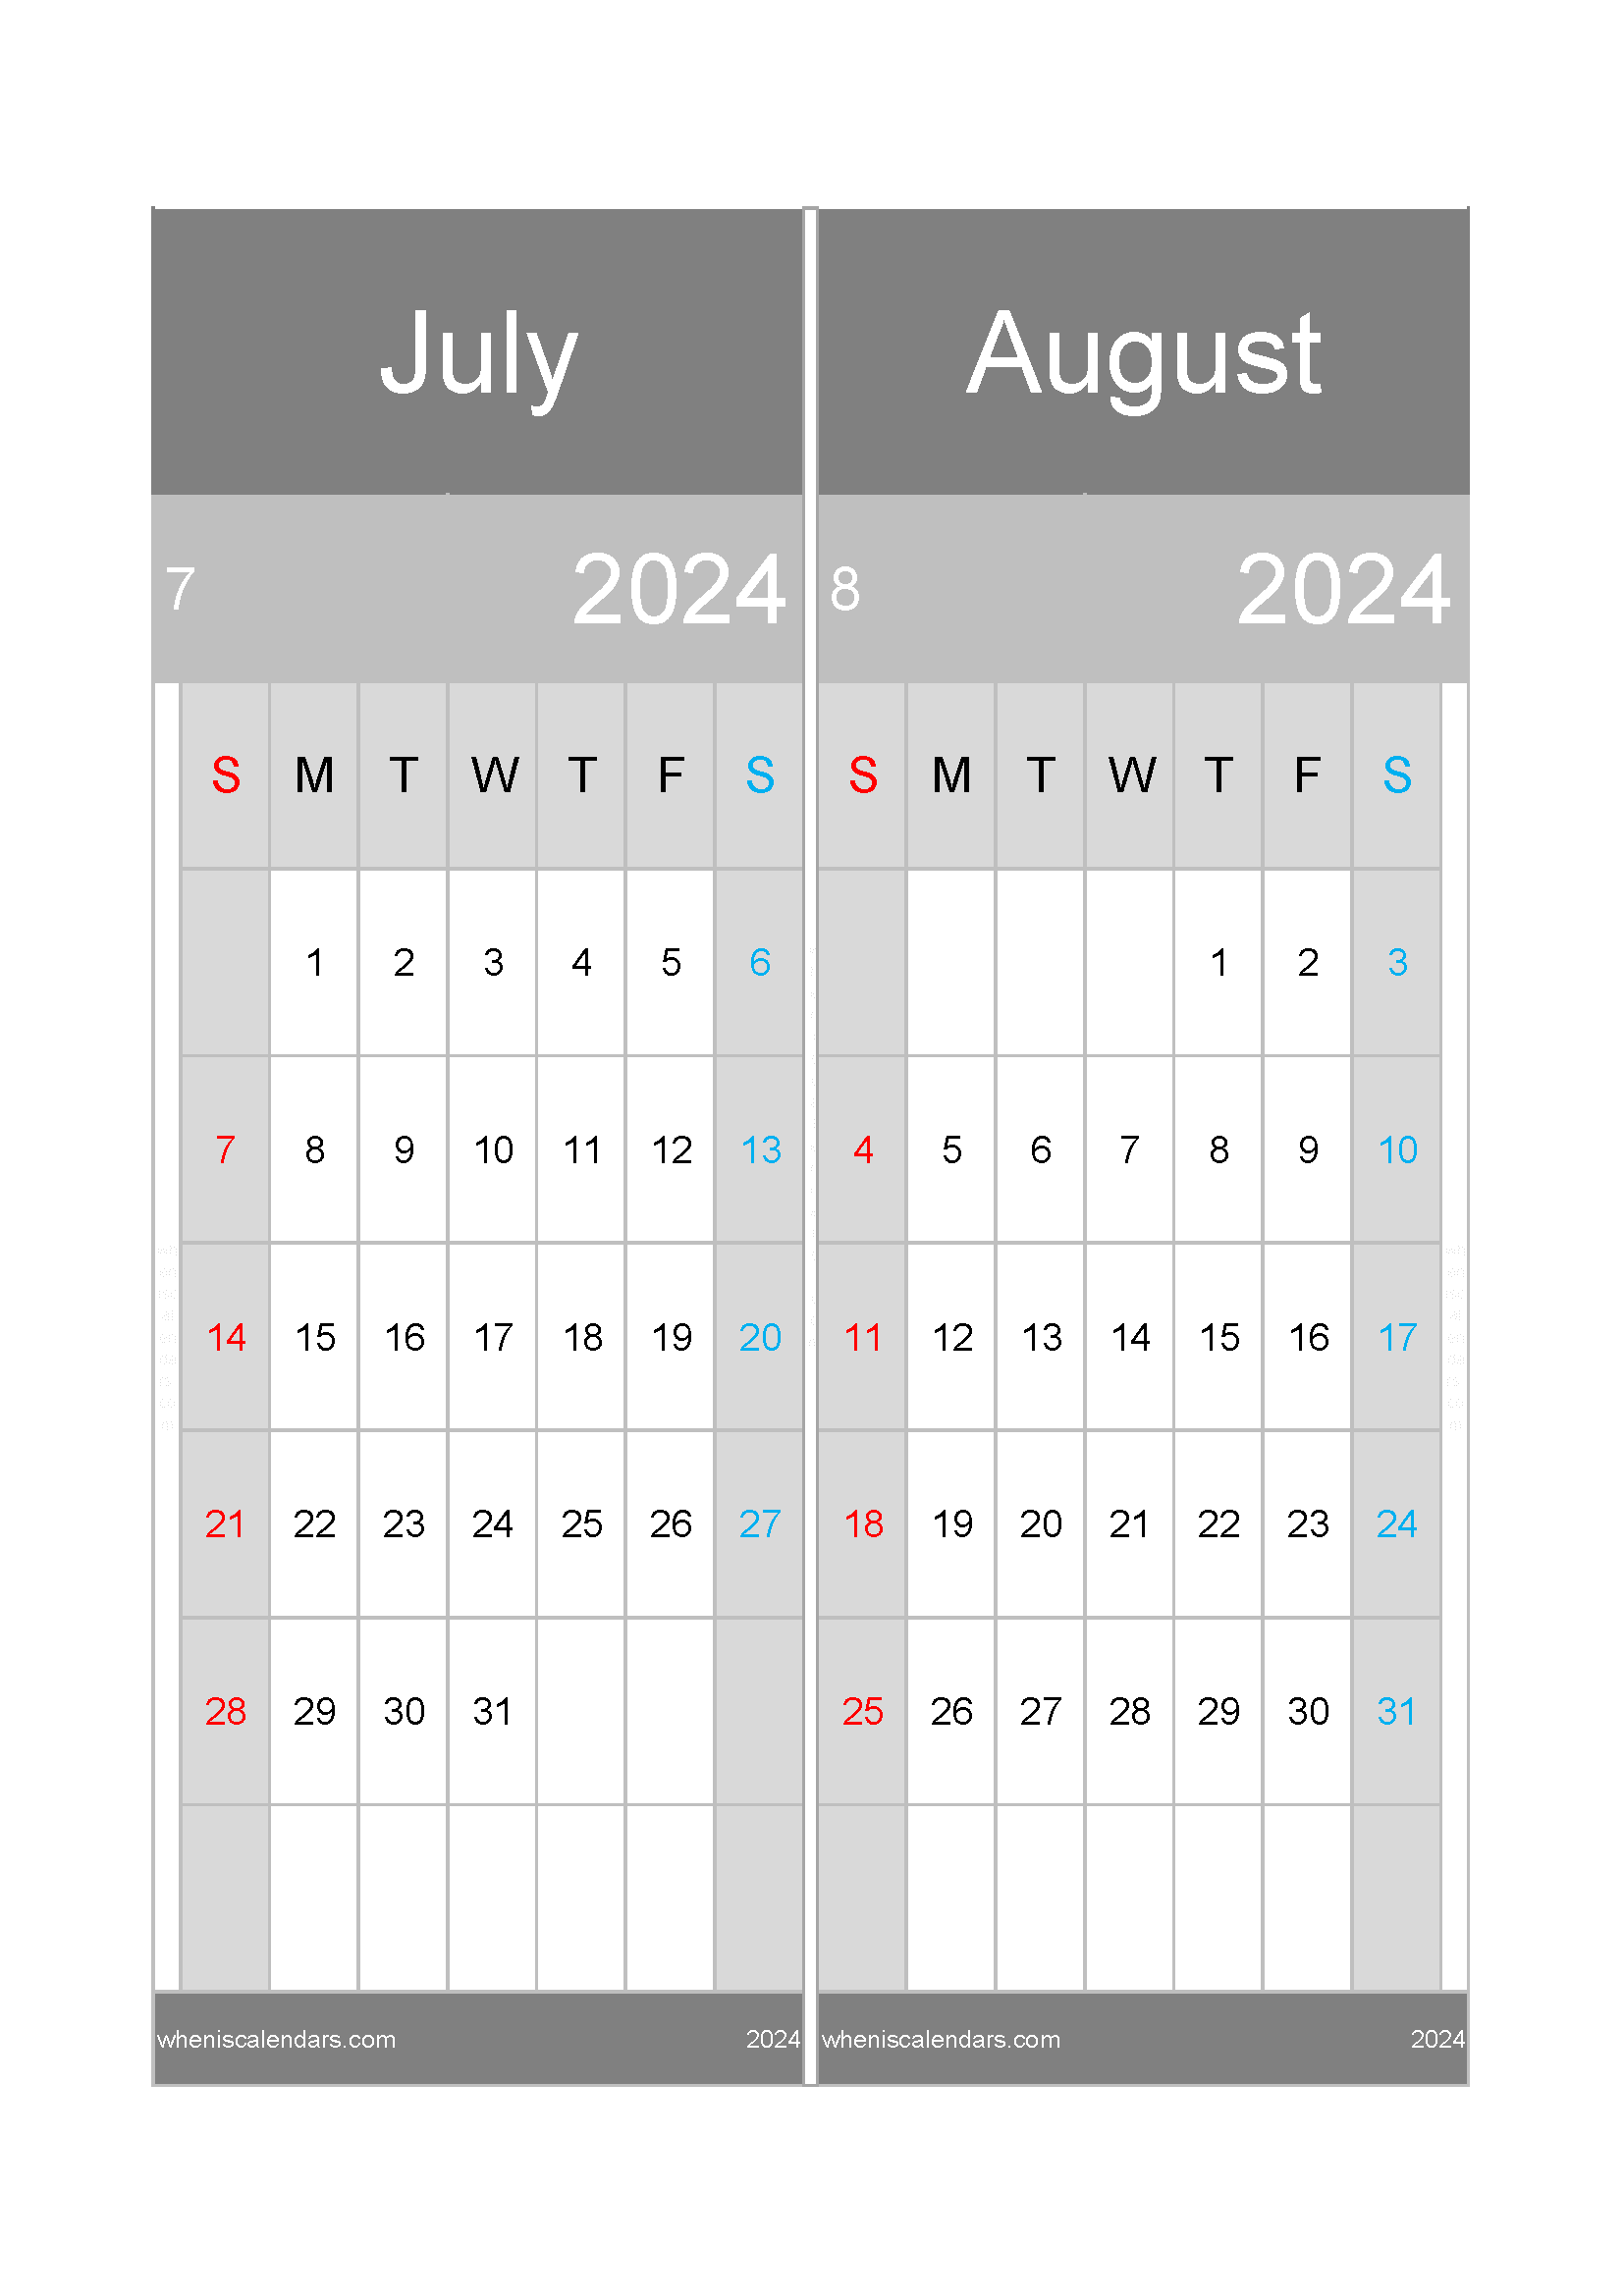 Download calendar for the month of July and August 2024 A4 JA24047